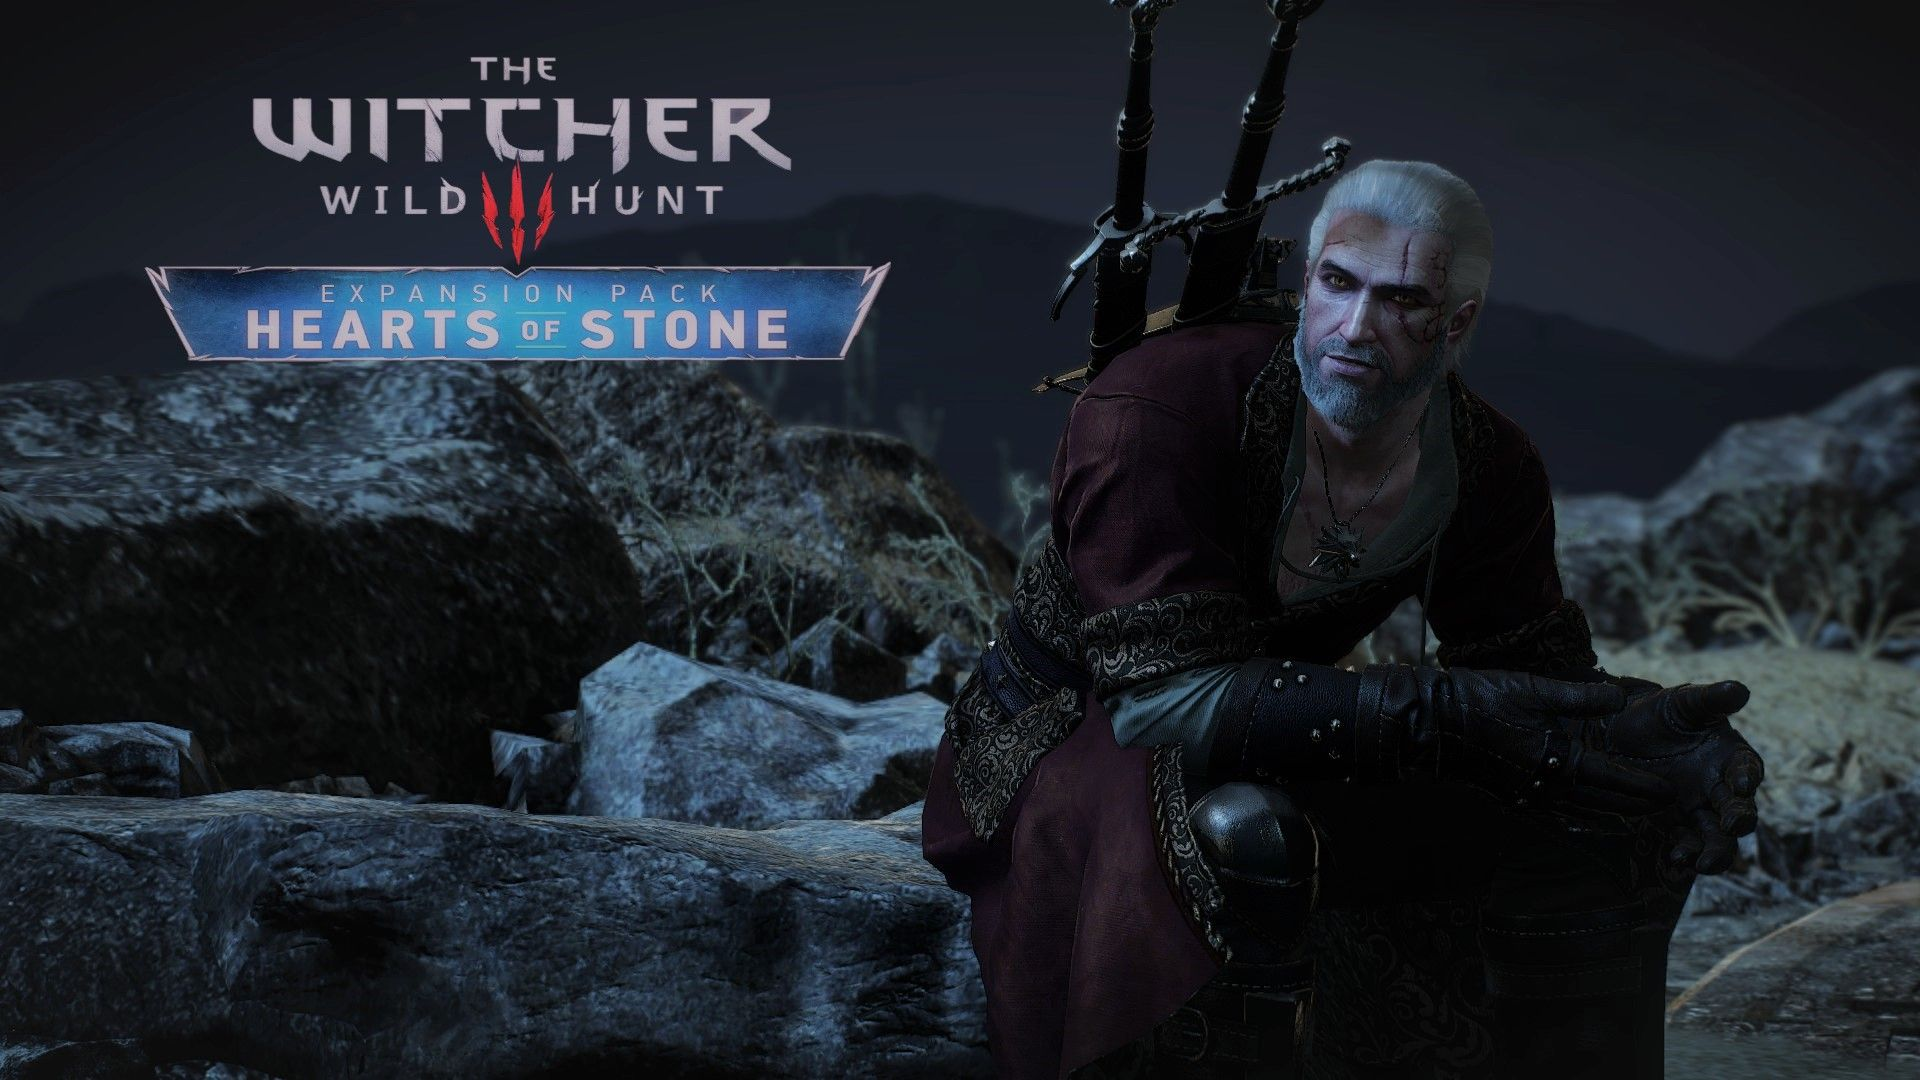 The witcher 3 heart of stone soundtrack фото 10